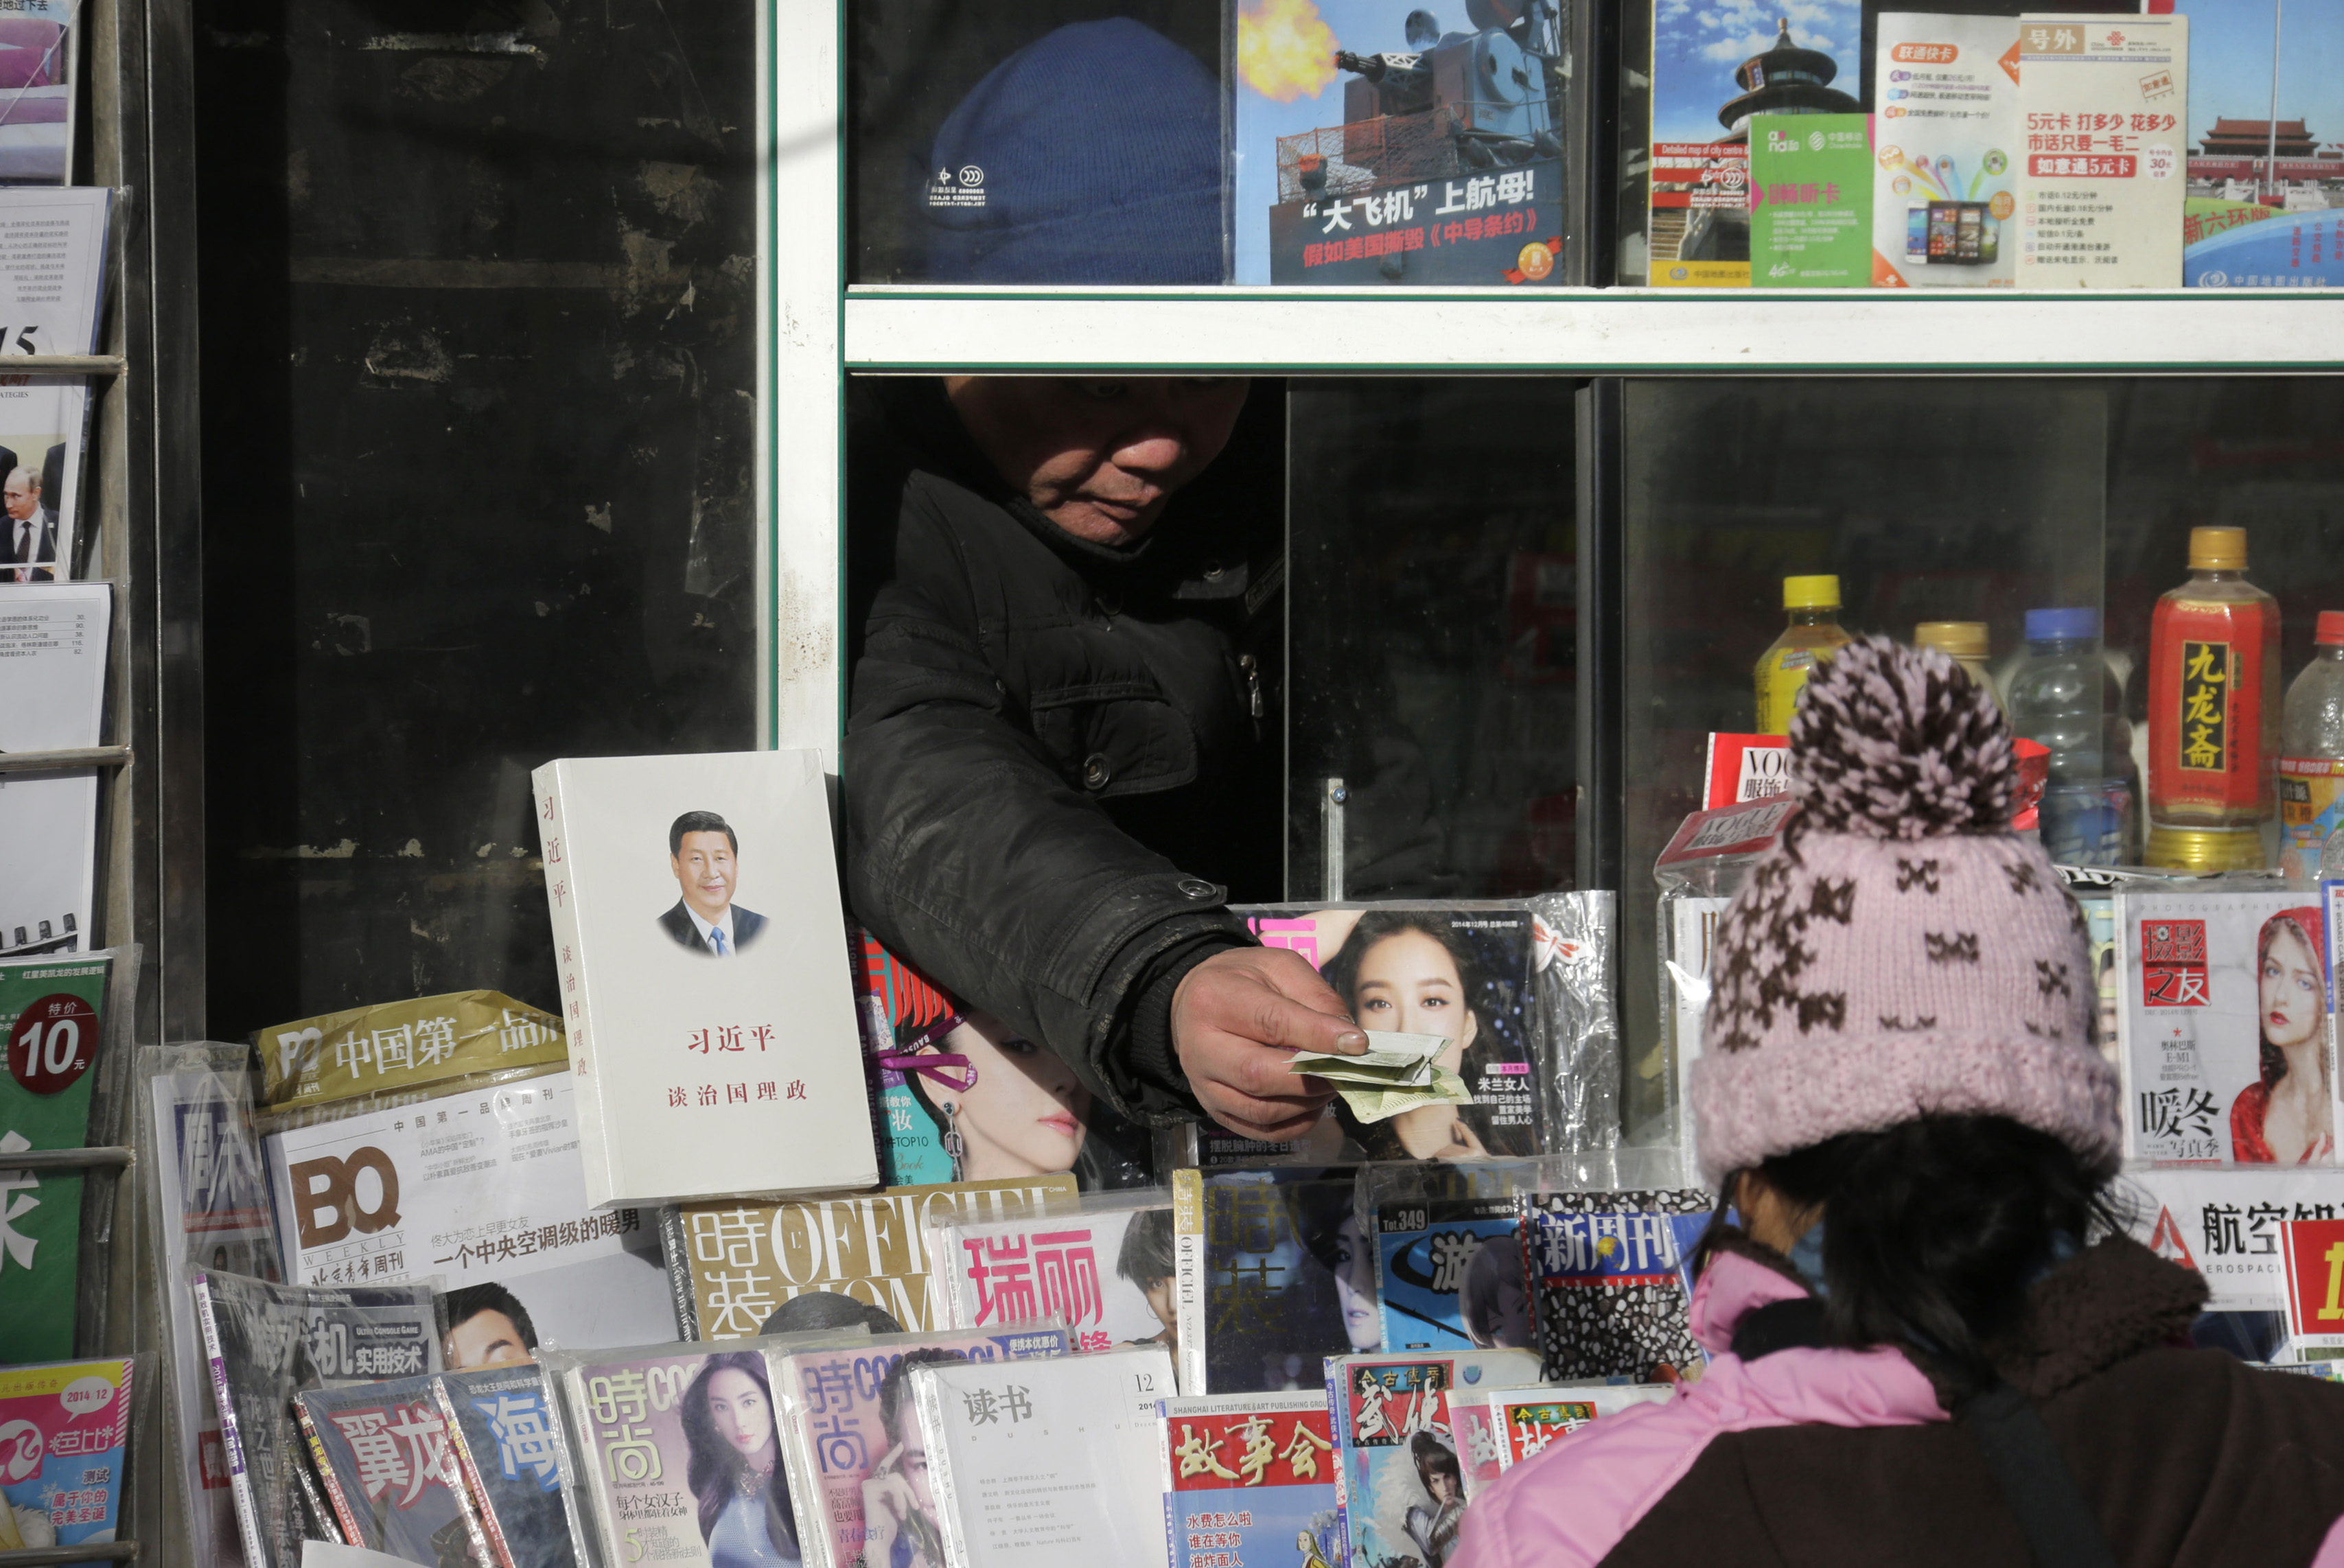 A newsstand vendor returns change to a customer near a book titled <i>Xi Jinping: The Governance of China</i> displayed on sale in central Beijing on Dec. 10, 2014 (Jason Lee—Reuters)